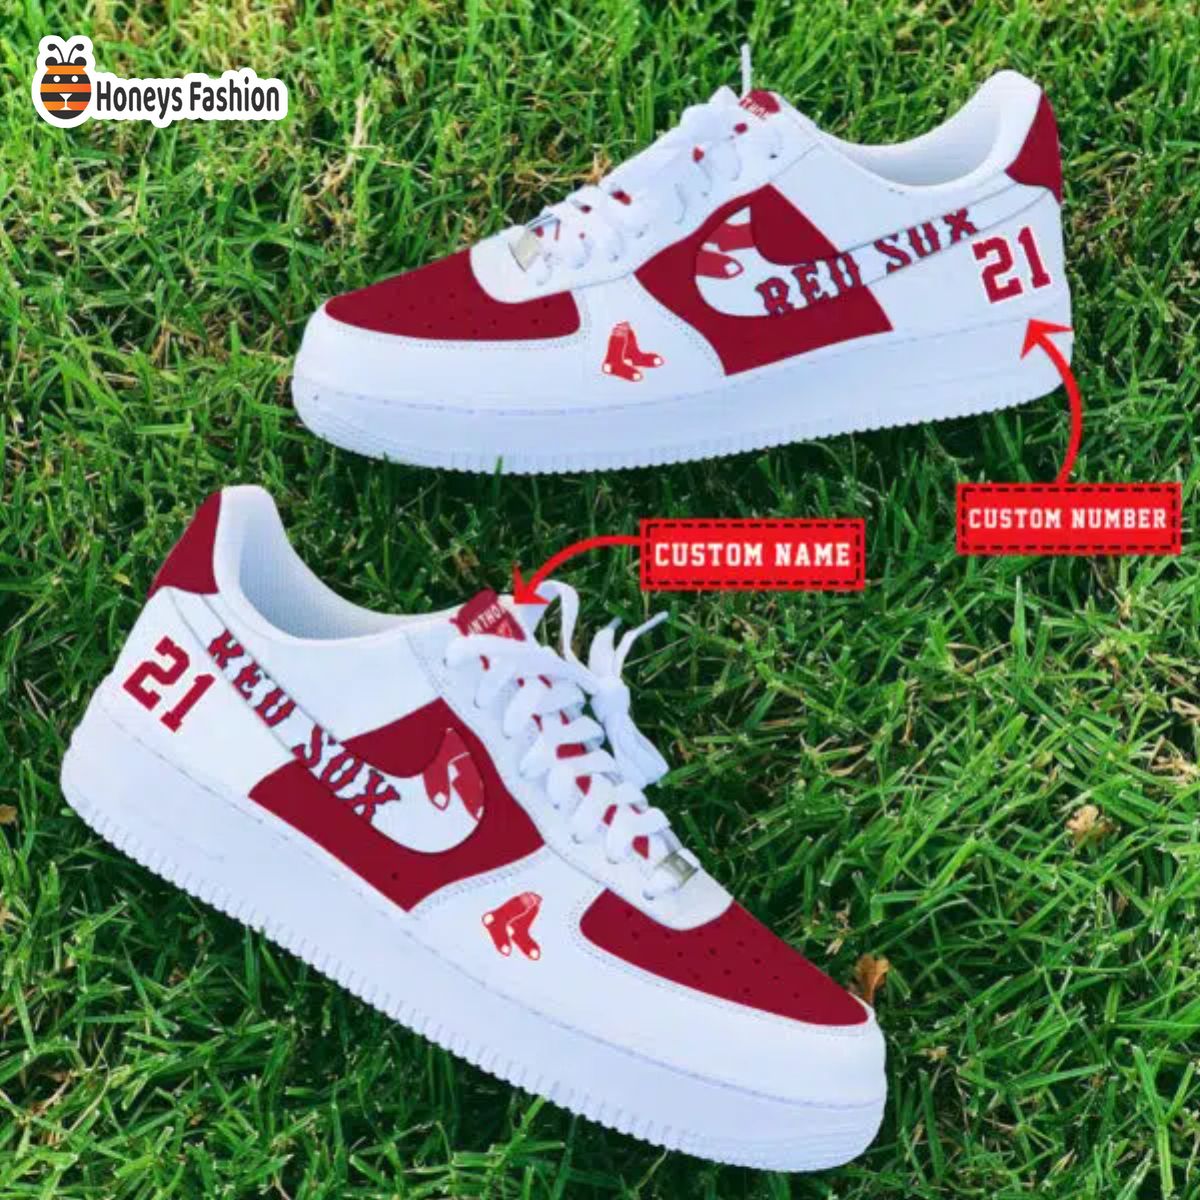 Boston Red Sox Af1 Shoes 140  Red sox shoes, Boston red sox shoes, Af1  shoes